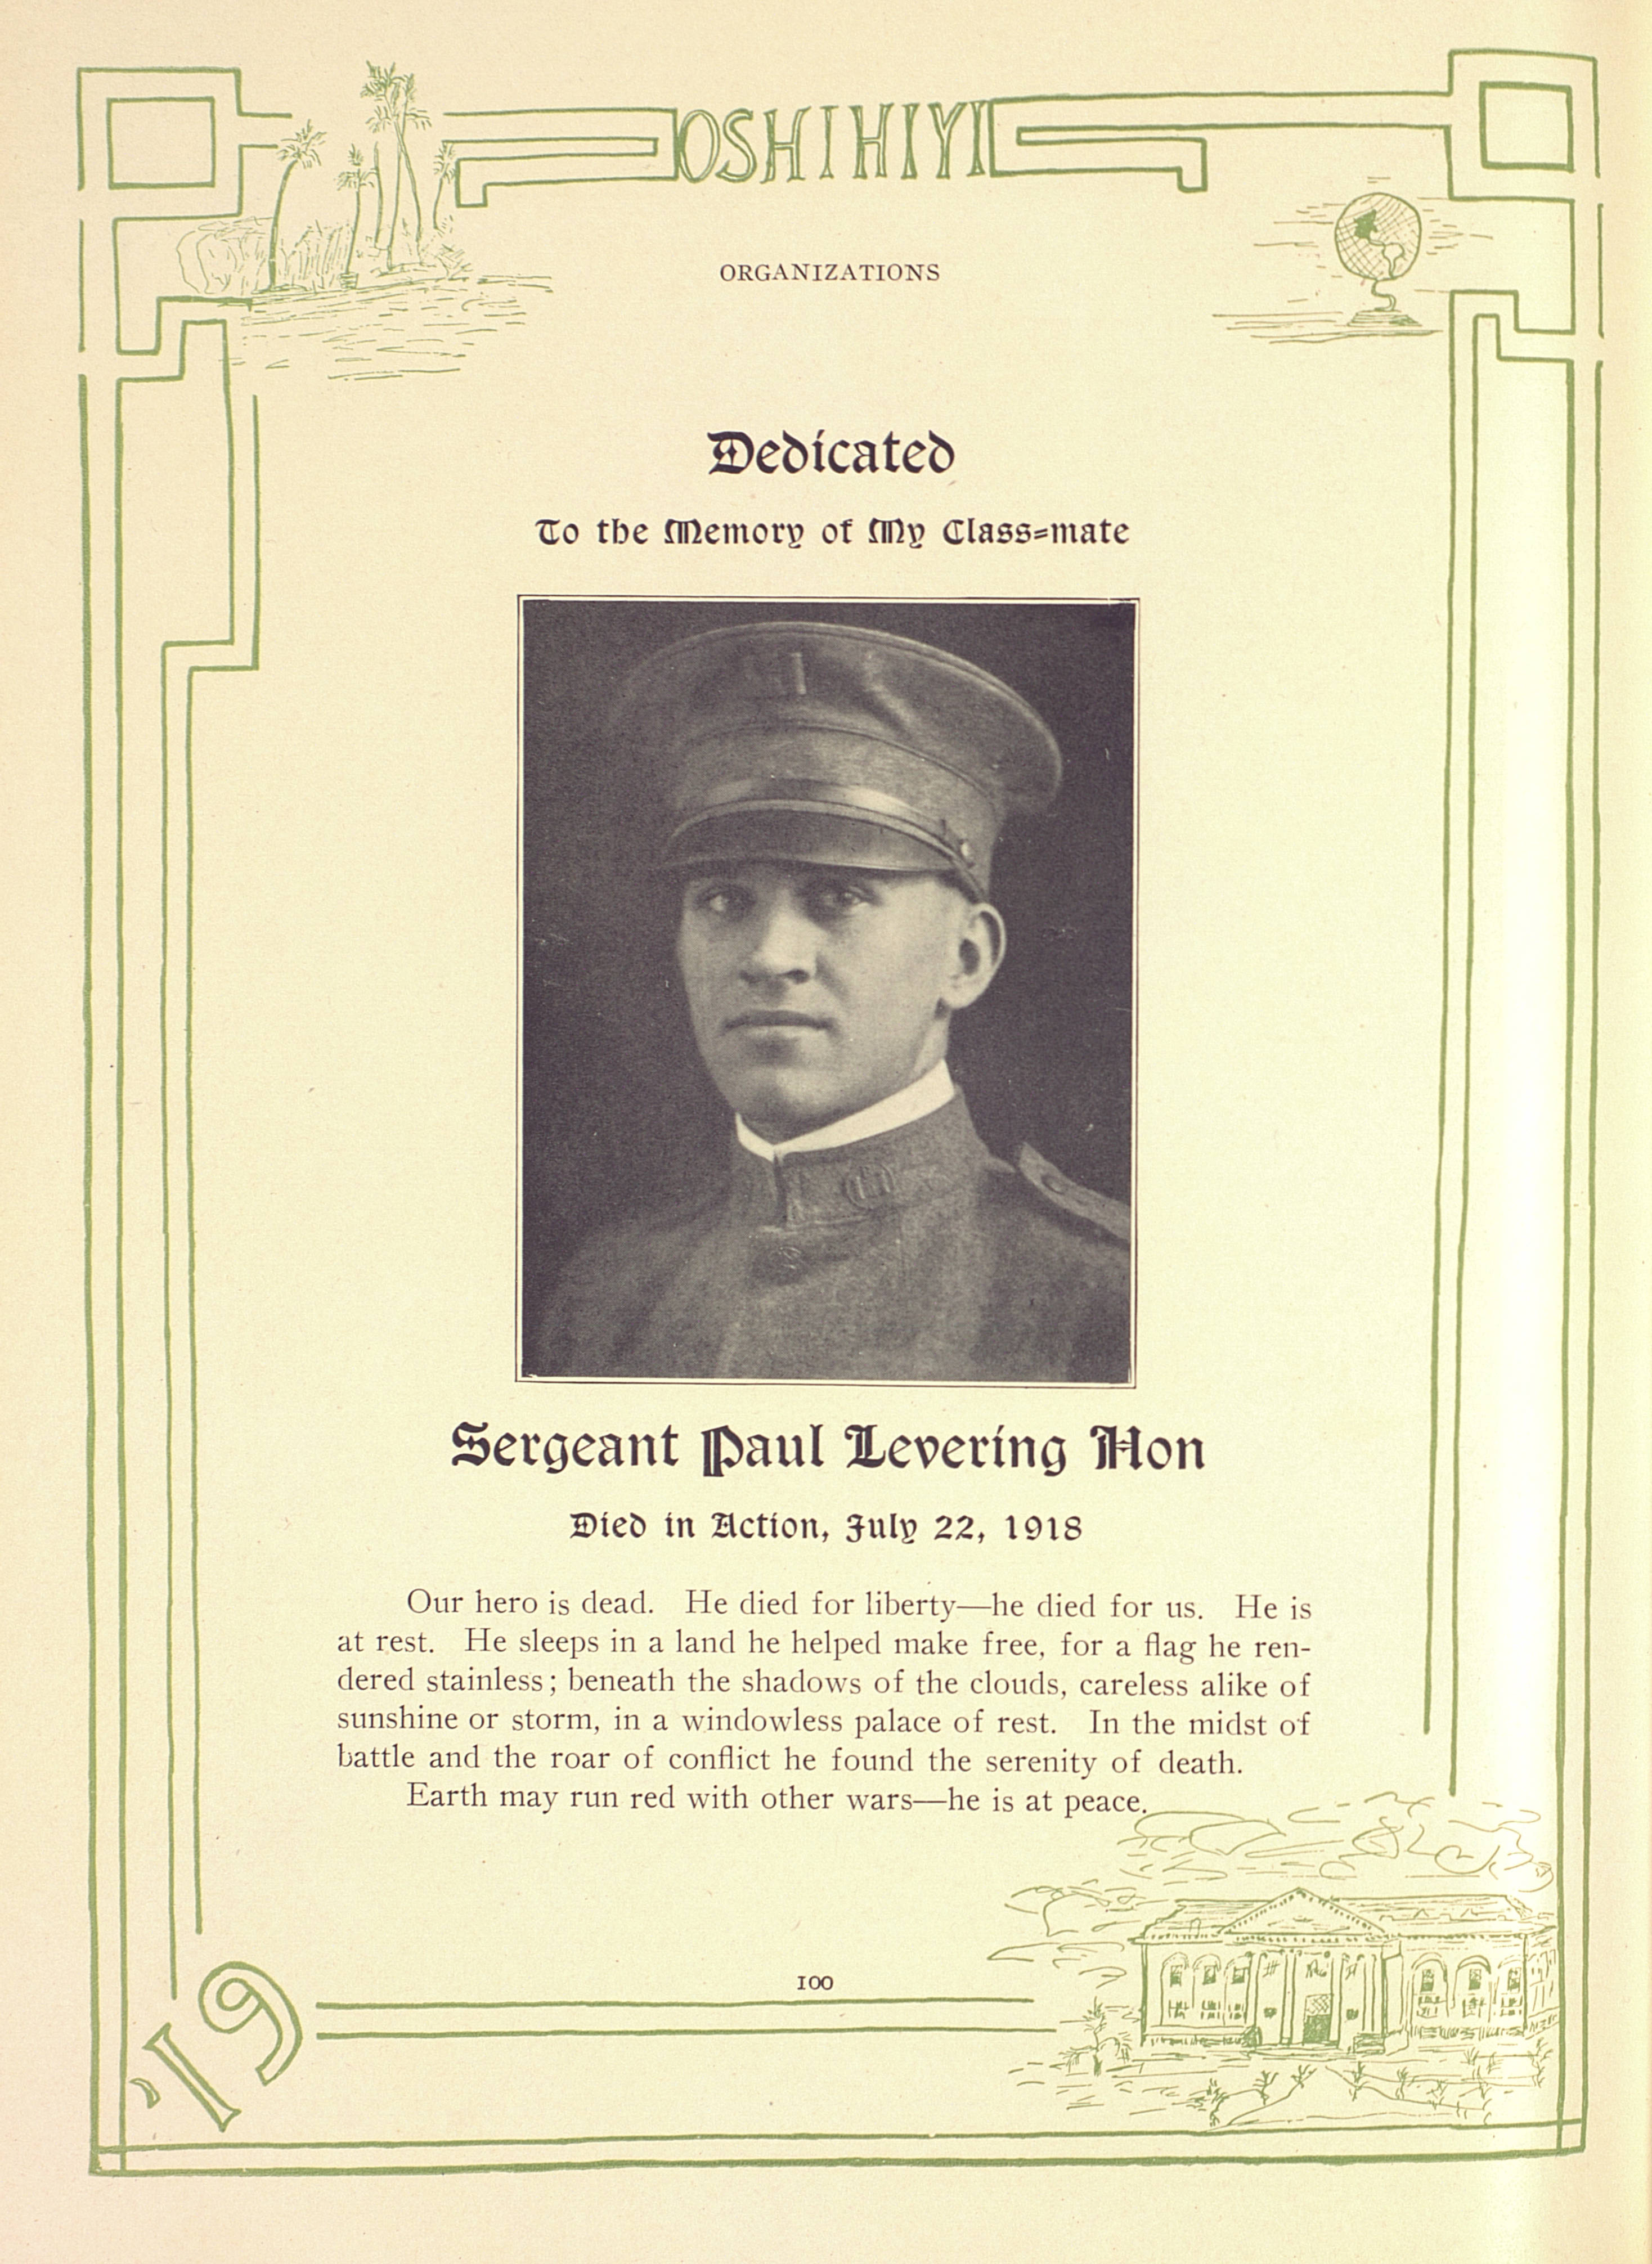 1919 Yearbook page for Paul Hon